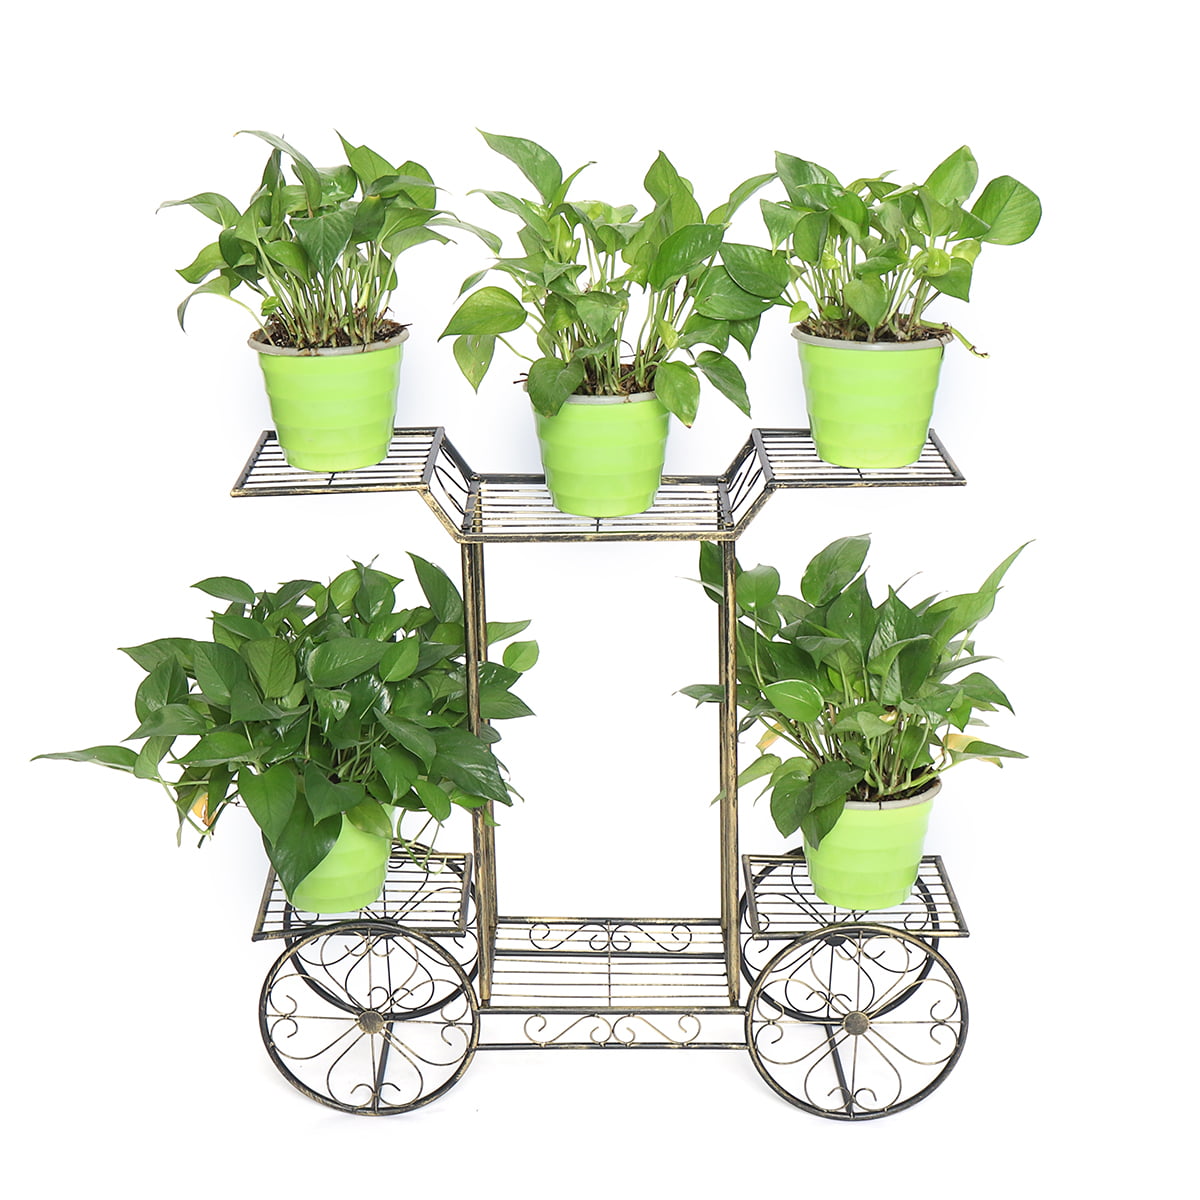 Outdoor Plant Storage Juvale Plant Stand Black Succulent Plant Stand Iron Bicycle Potted Plant Holder for Garden Decor Miniature Plant Stand Indoor 6.73 x 5.92 x 2.5 inches 